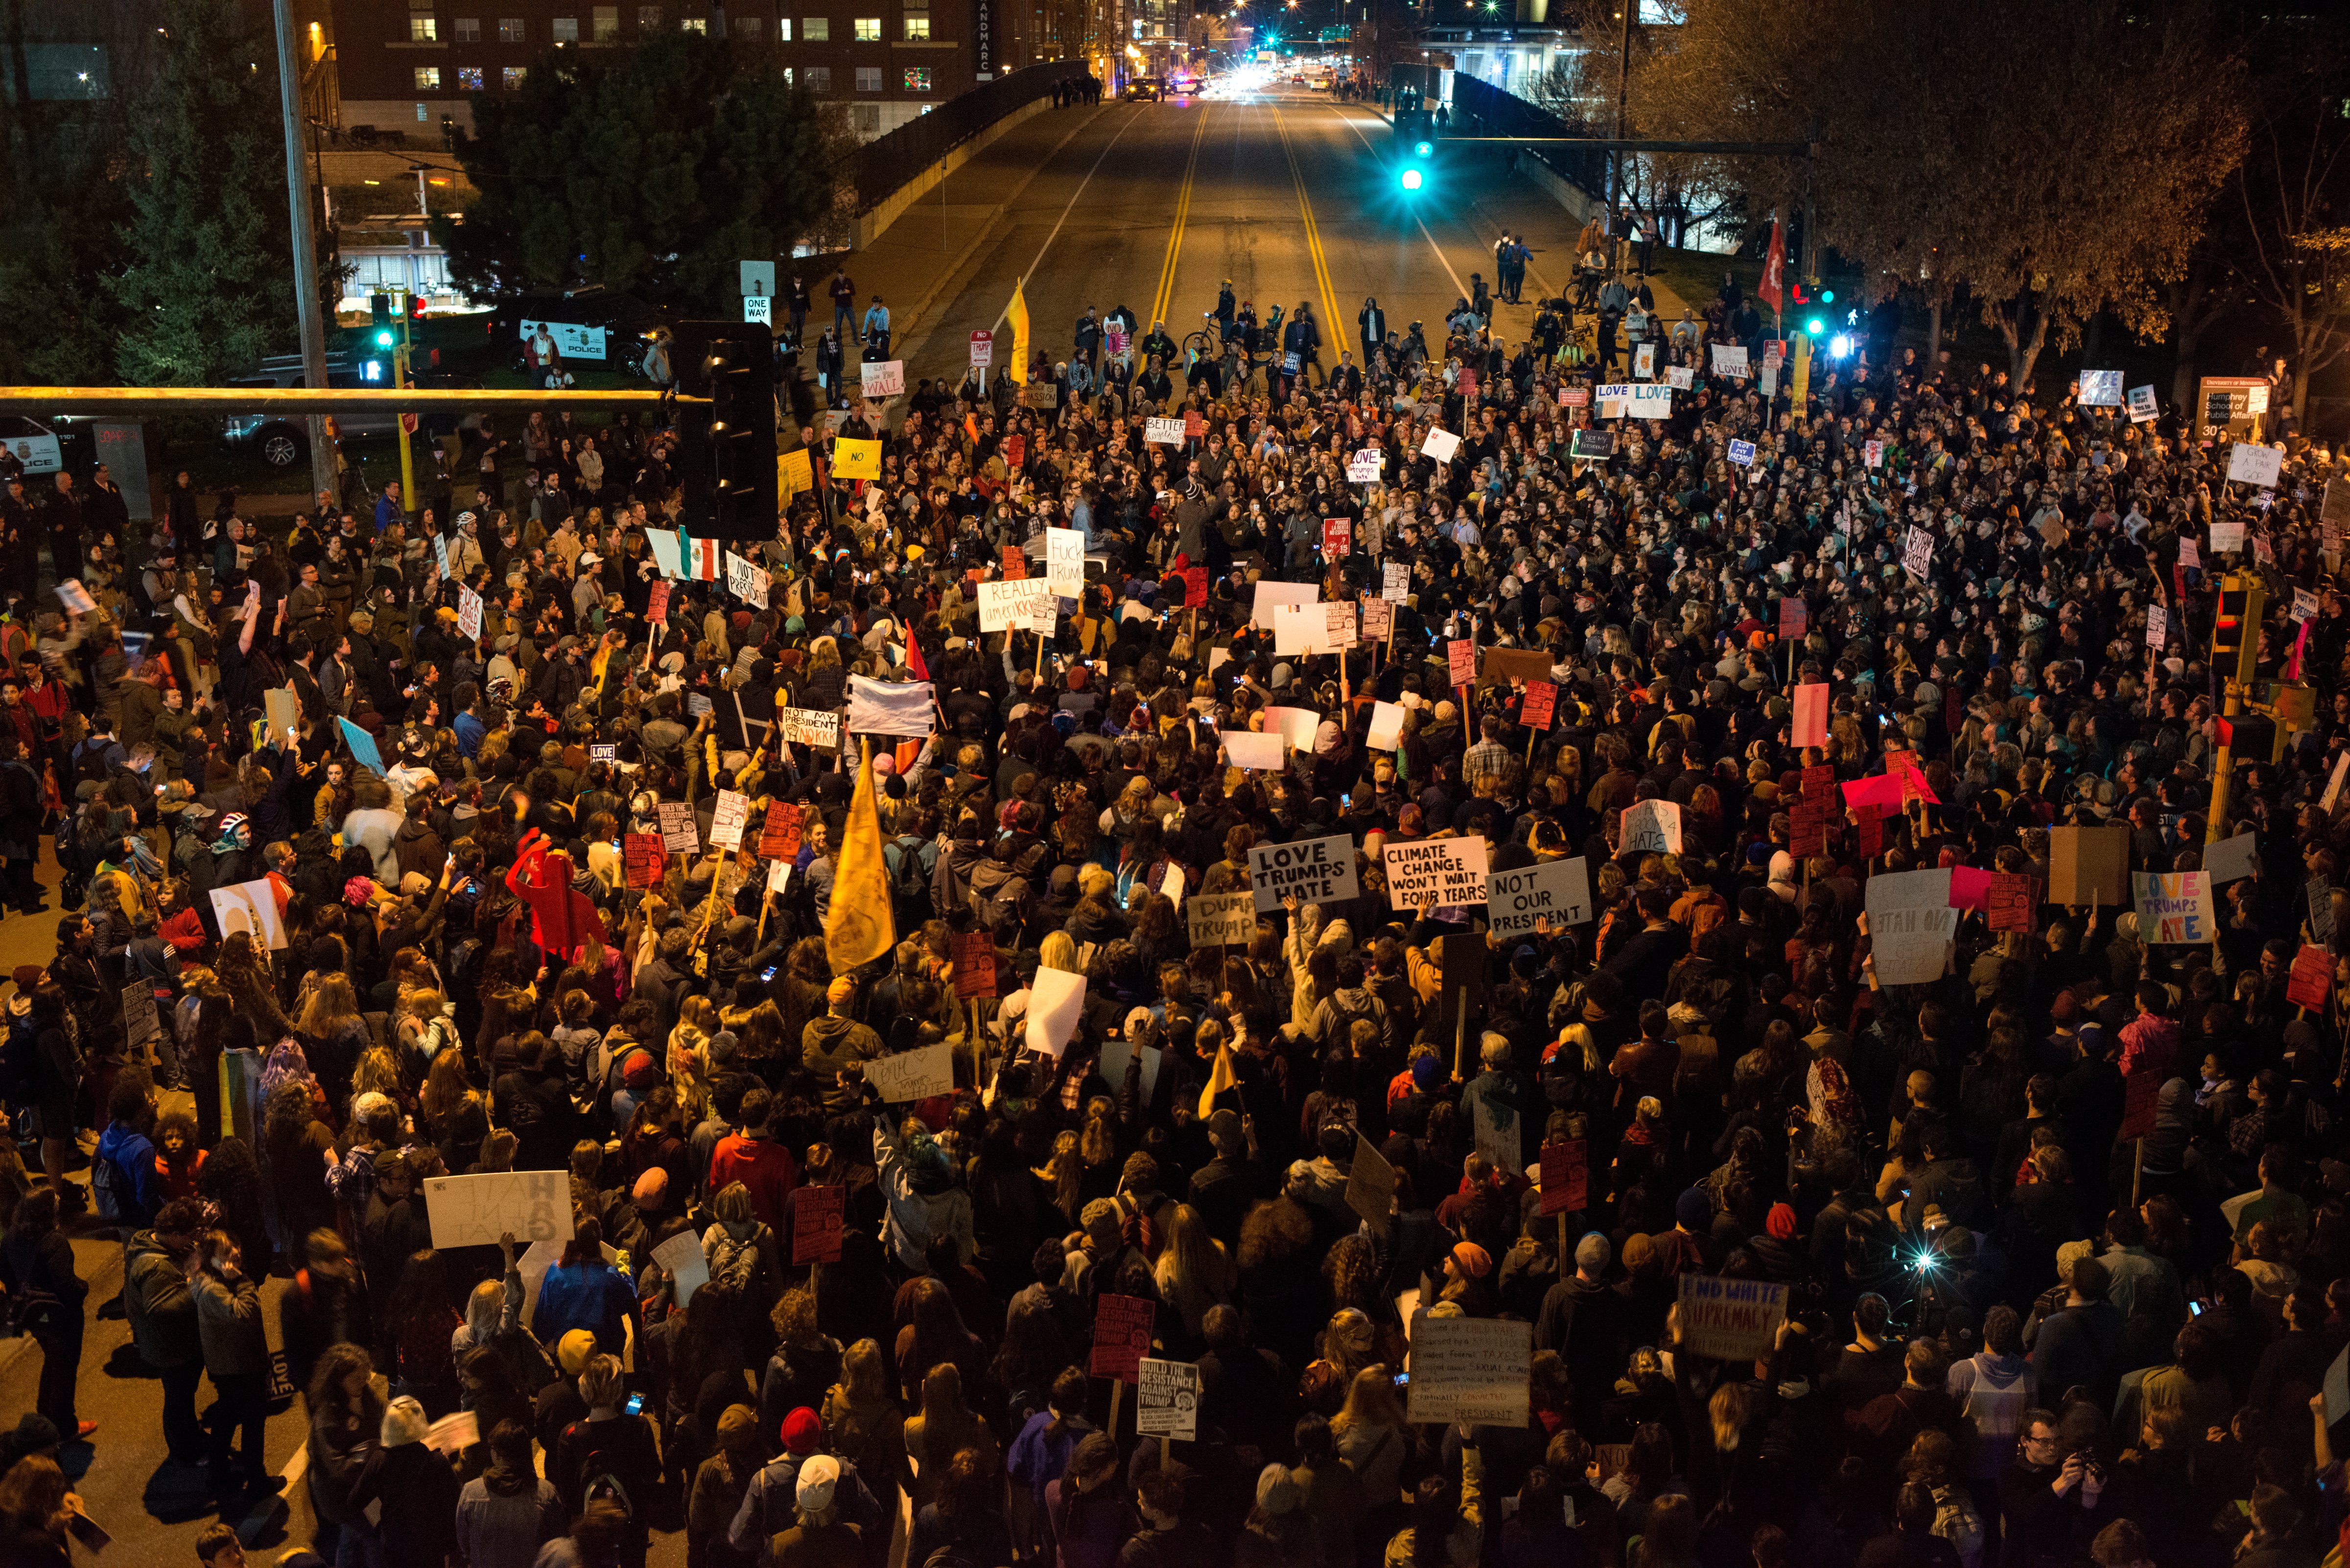 Protesters of President Donald Trump gather in an intersection outside the Humphrey School of Affairs on the campus of the University of Minnesota on Nov. 10, 2016 in Minneapolis, Minnesota. (Stephen Maturen—Getty Images)